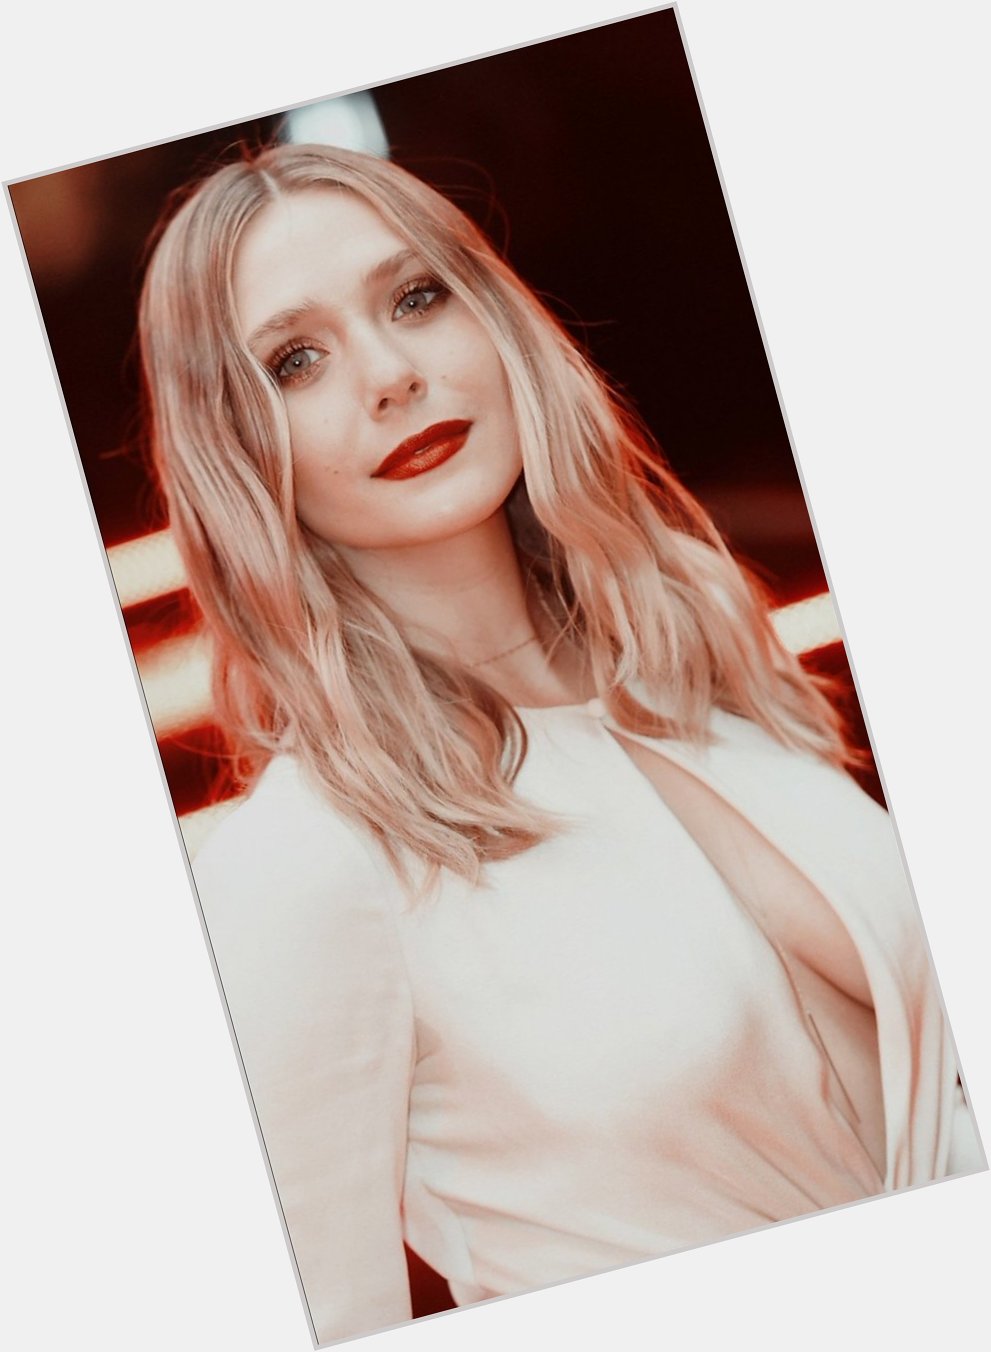 God is a woman and her name is Elizabeth Olsen
HAPPY BIRTHDAY LIZZIE <3 